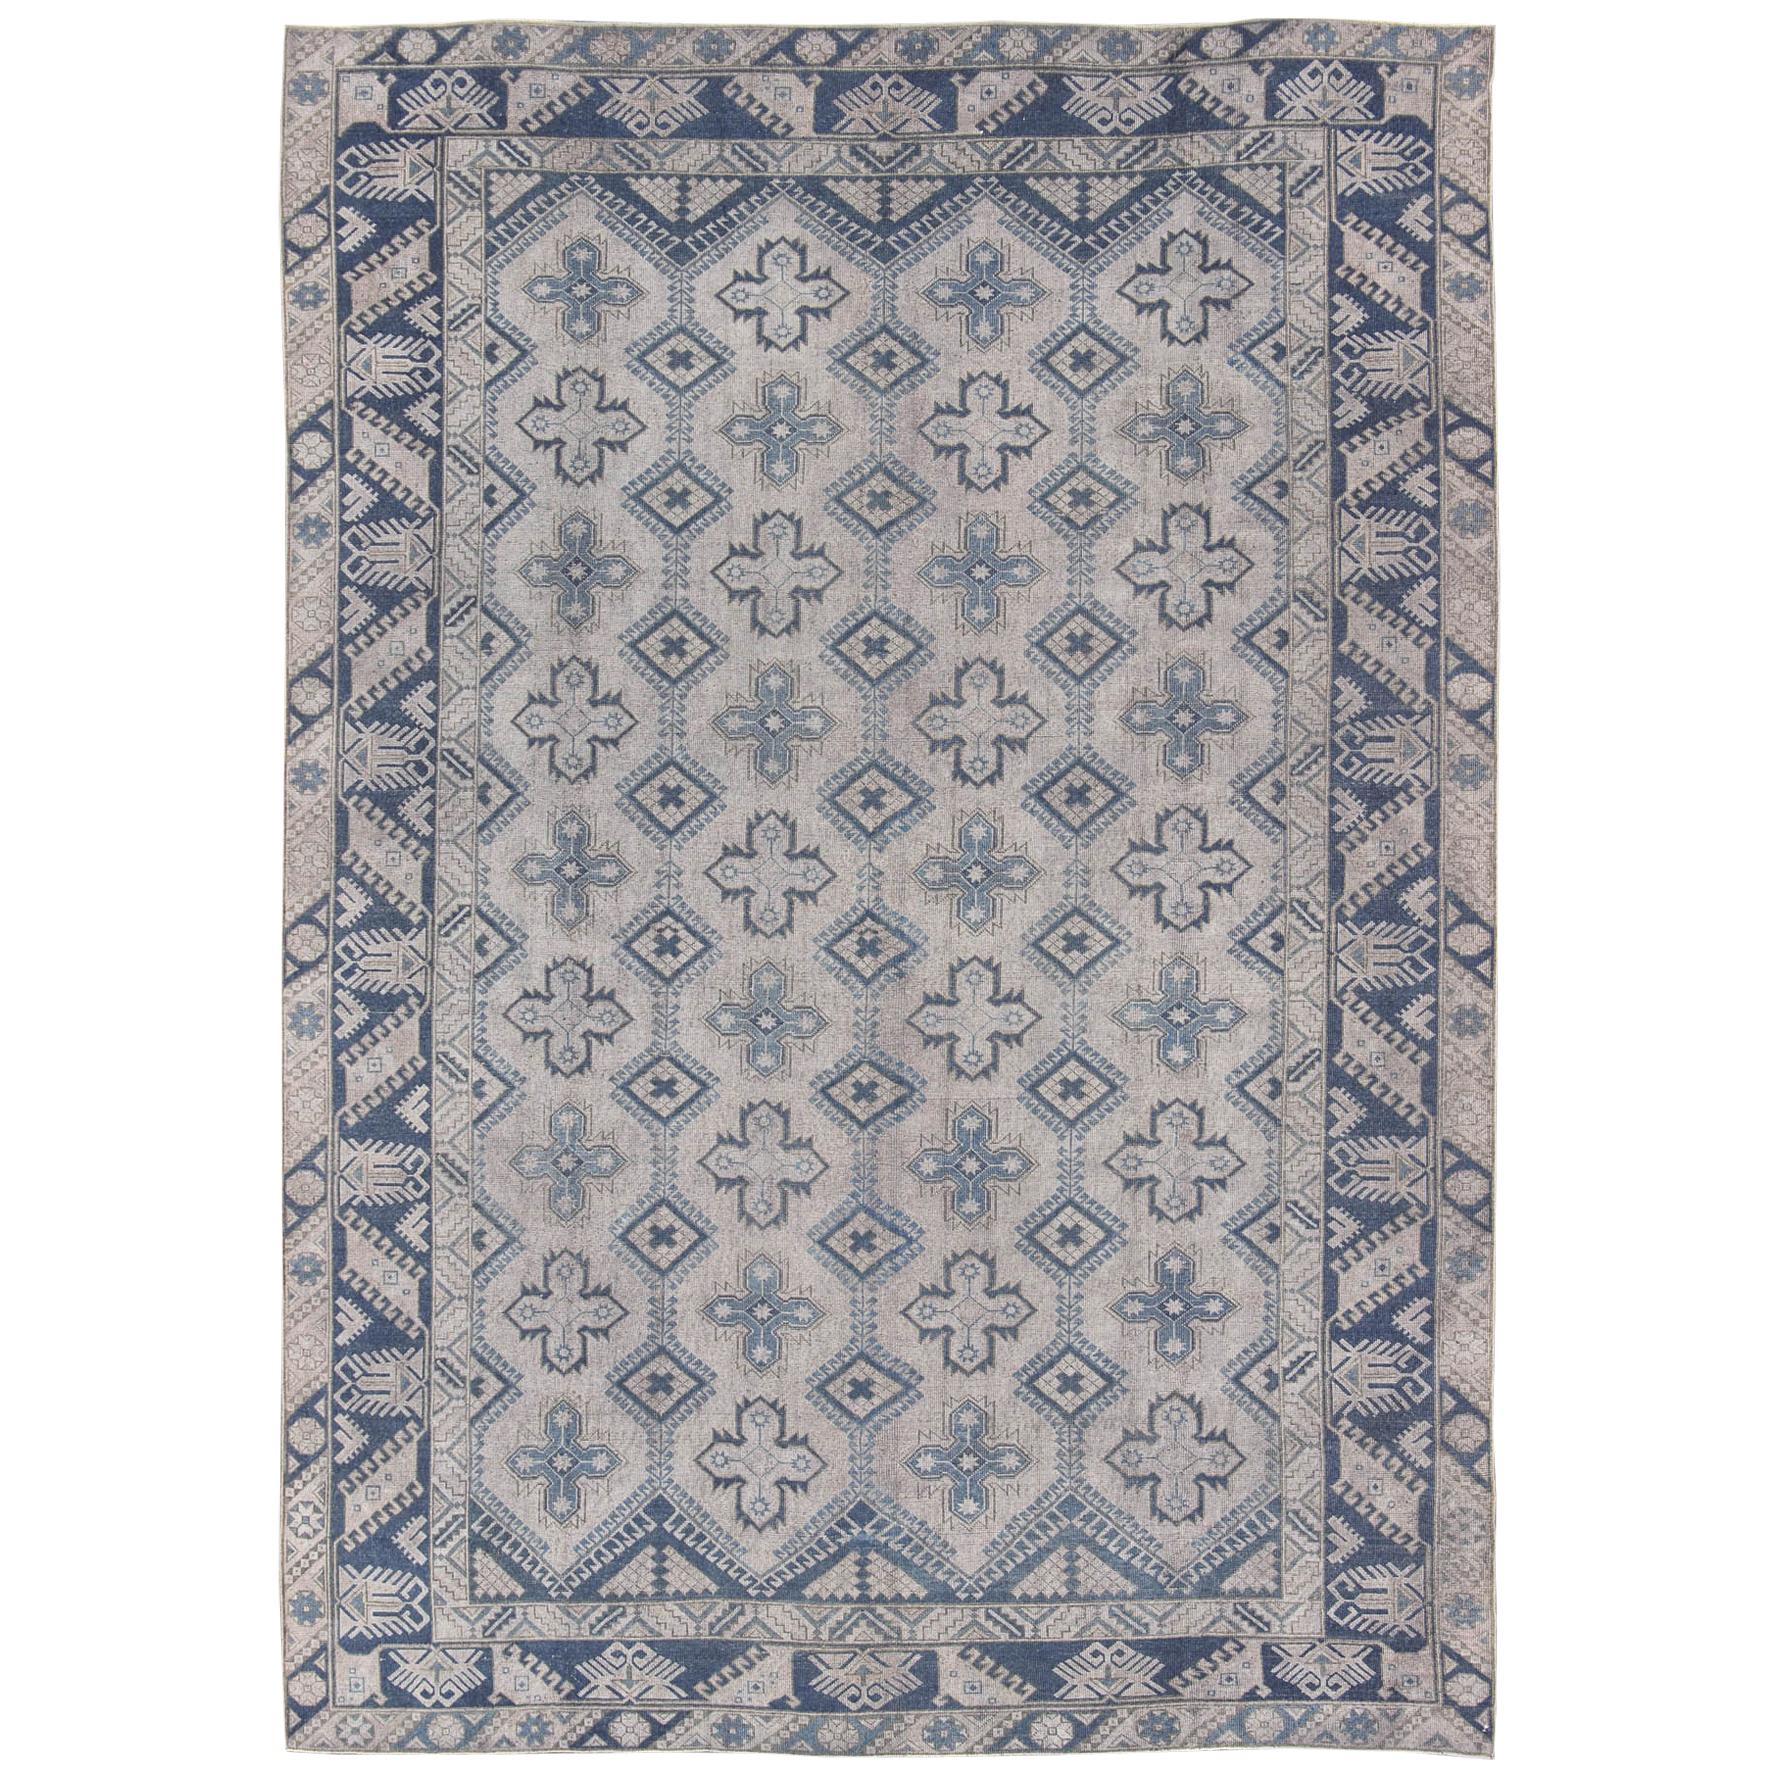 Vintage Turkish Oushak Rug in Blue with All-Over Geometric Design in Gray & Blue